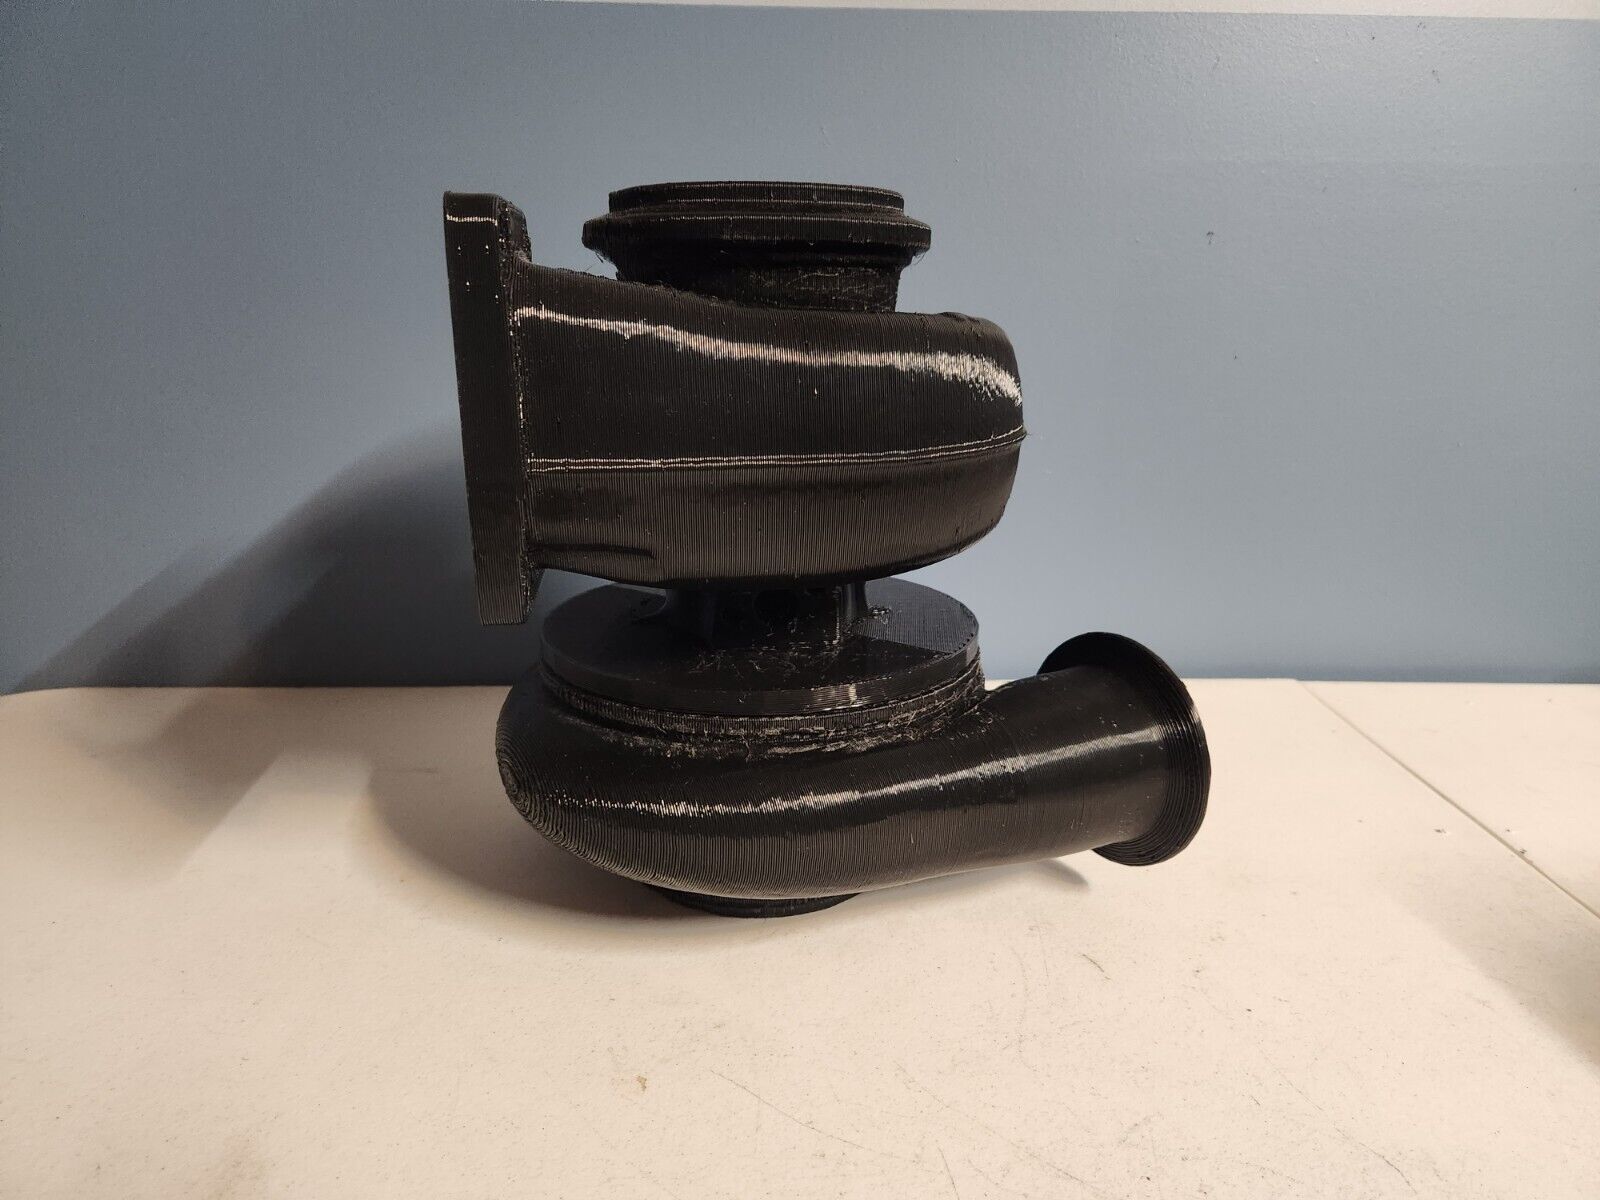 FI S400 3D Printed Mockup Turbos exact size of the real thing, In 3 parts,